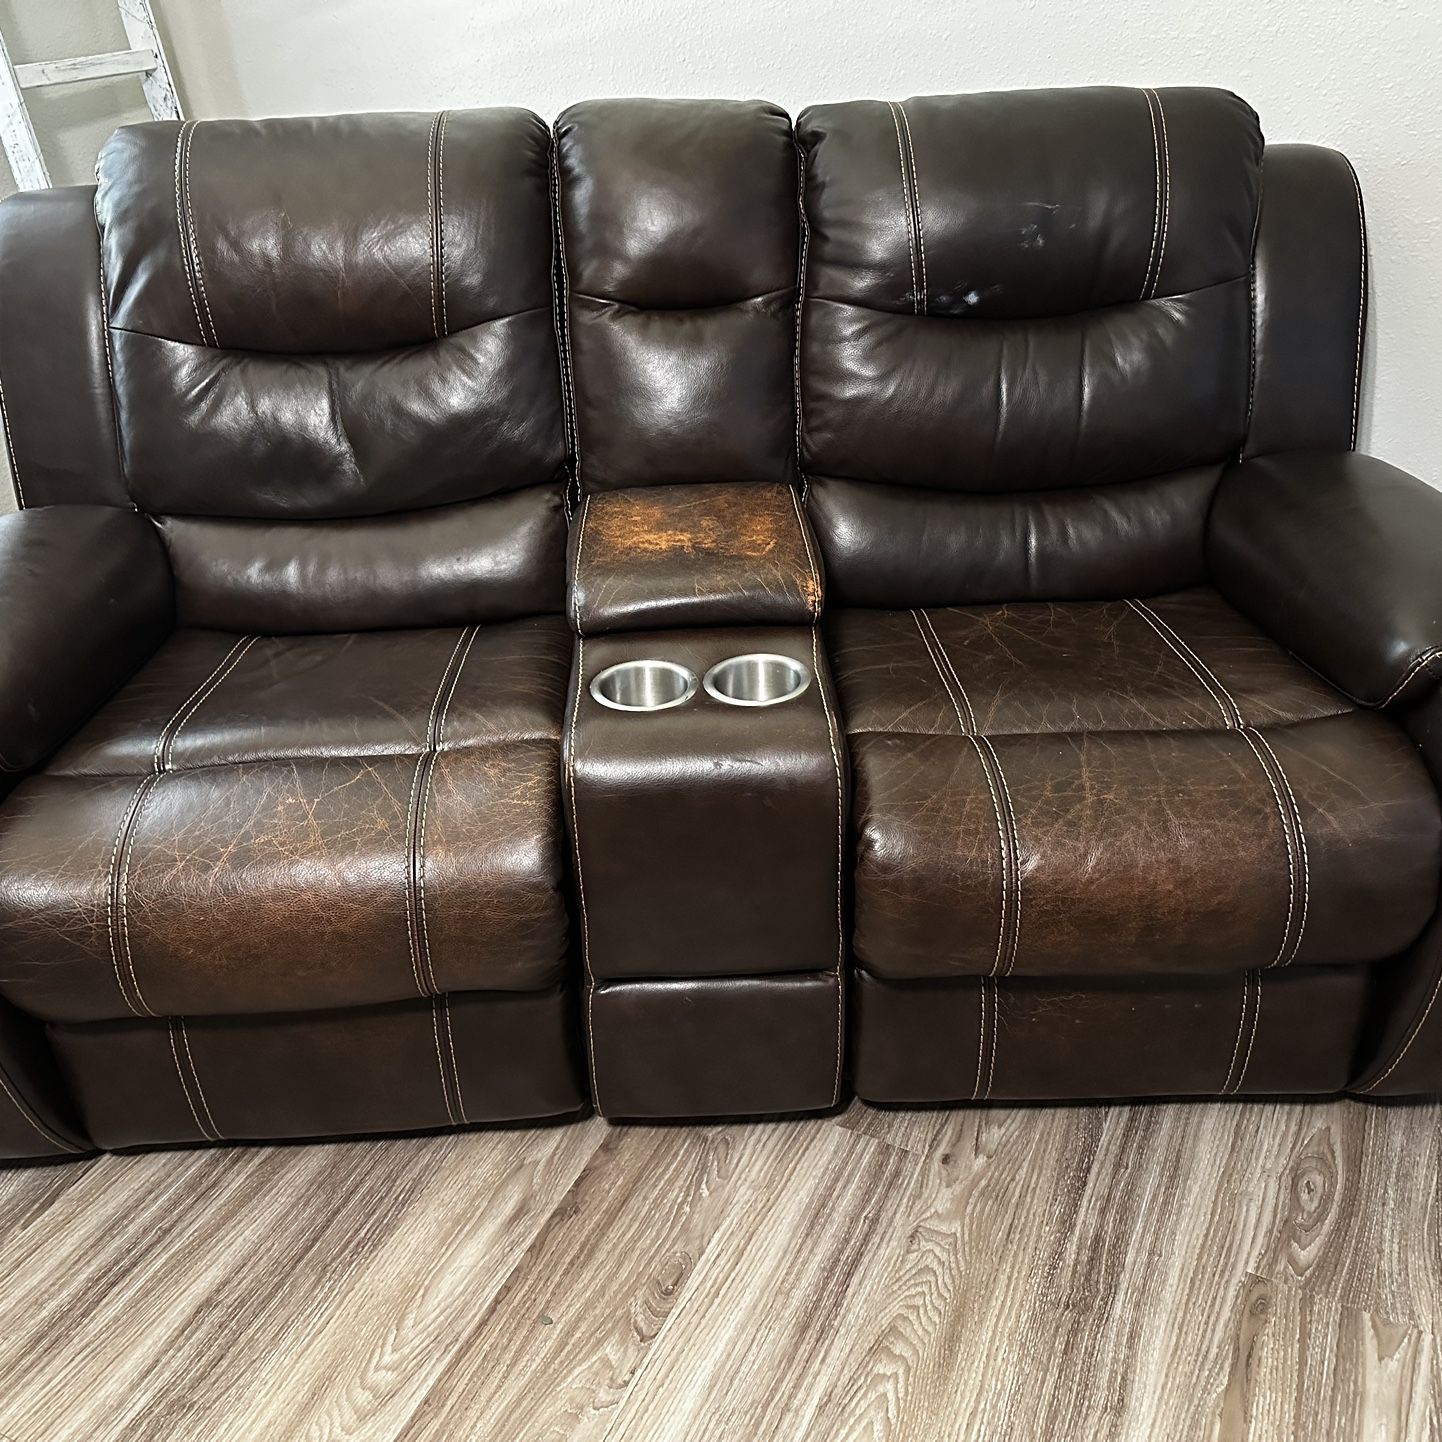 Titan Chocolate Elite Couch And Loveseat!